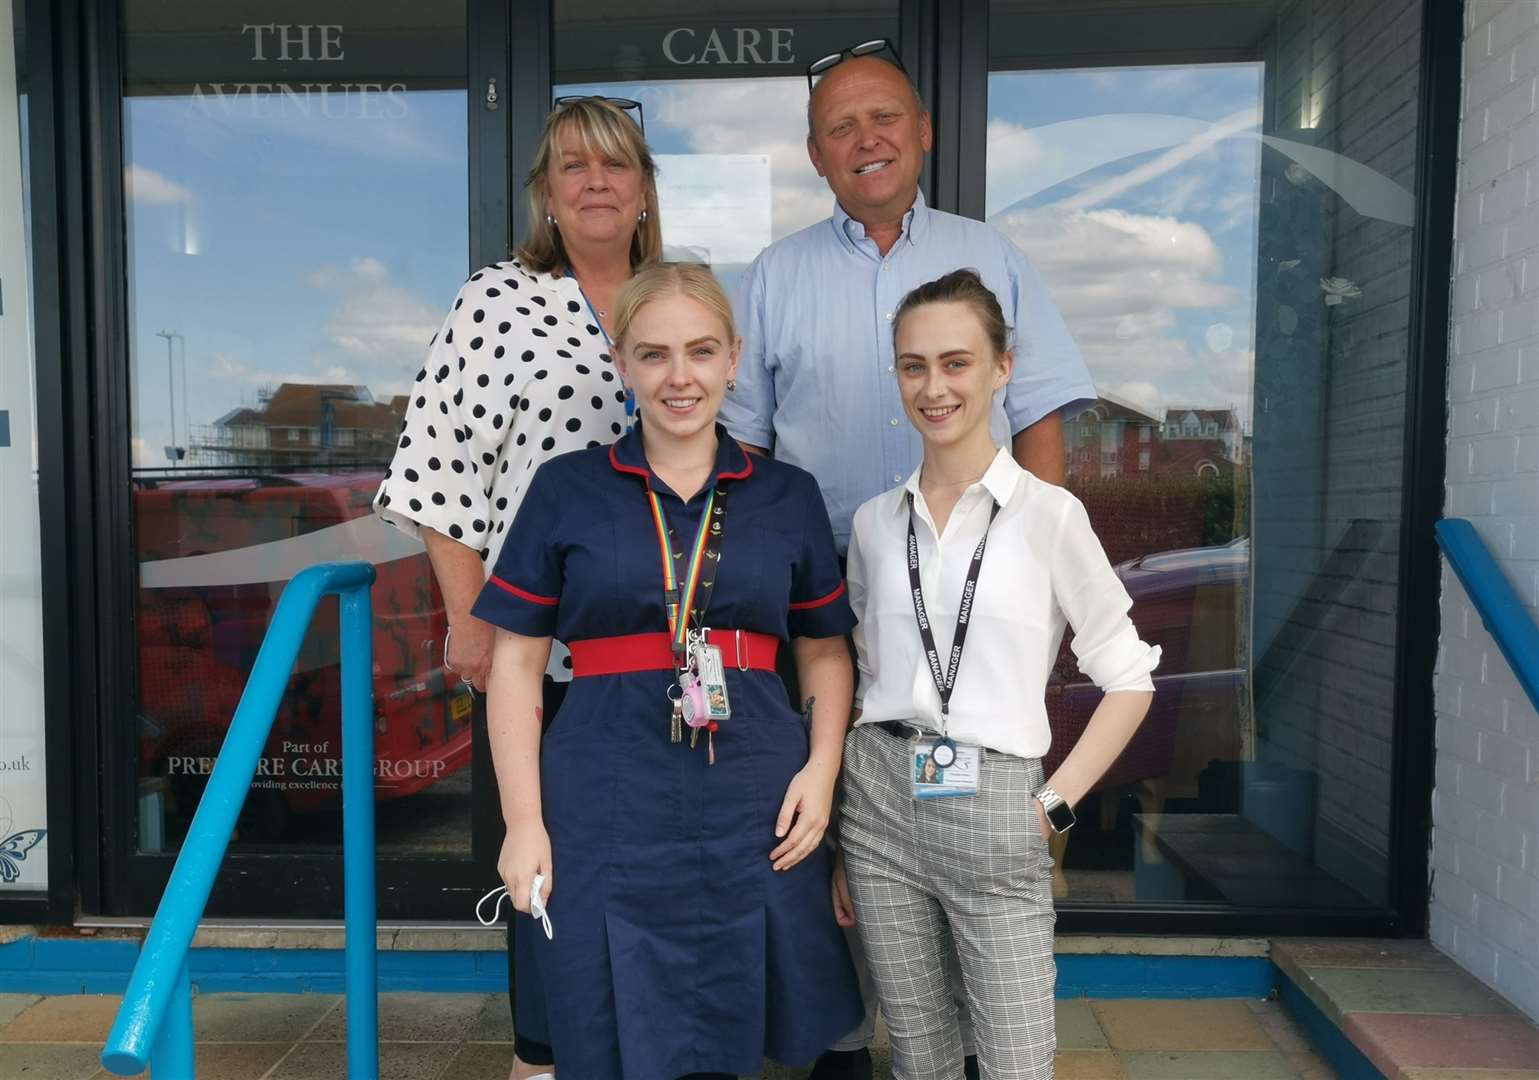 Operations manager Michelle Jenkins, chief executive Shawn Cole, head of care Katie Prendergast and manager Clarissa Javes